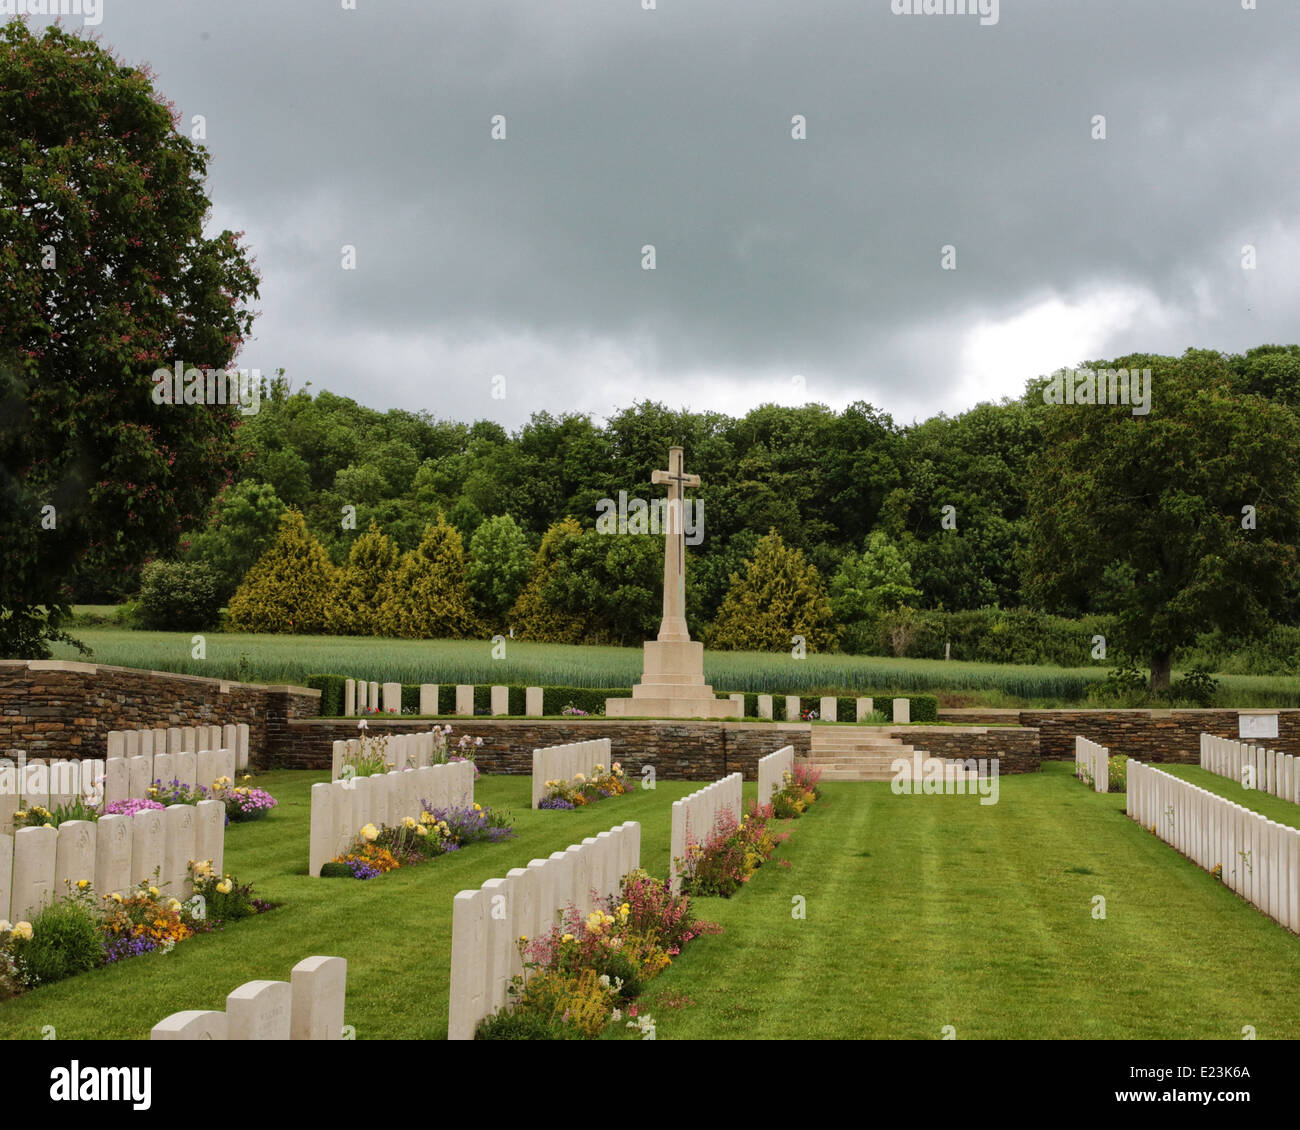 The Cross of sacrifice in Templeux-Le-Guerard British Cemetery of the Great War Stock Photo